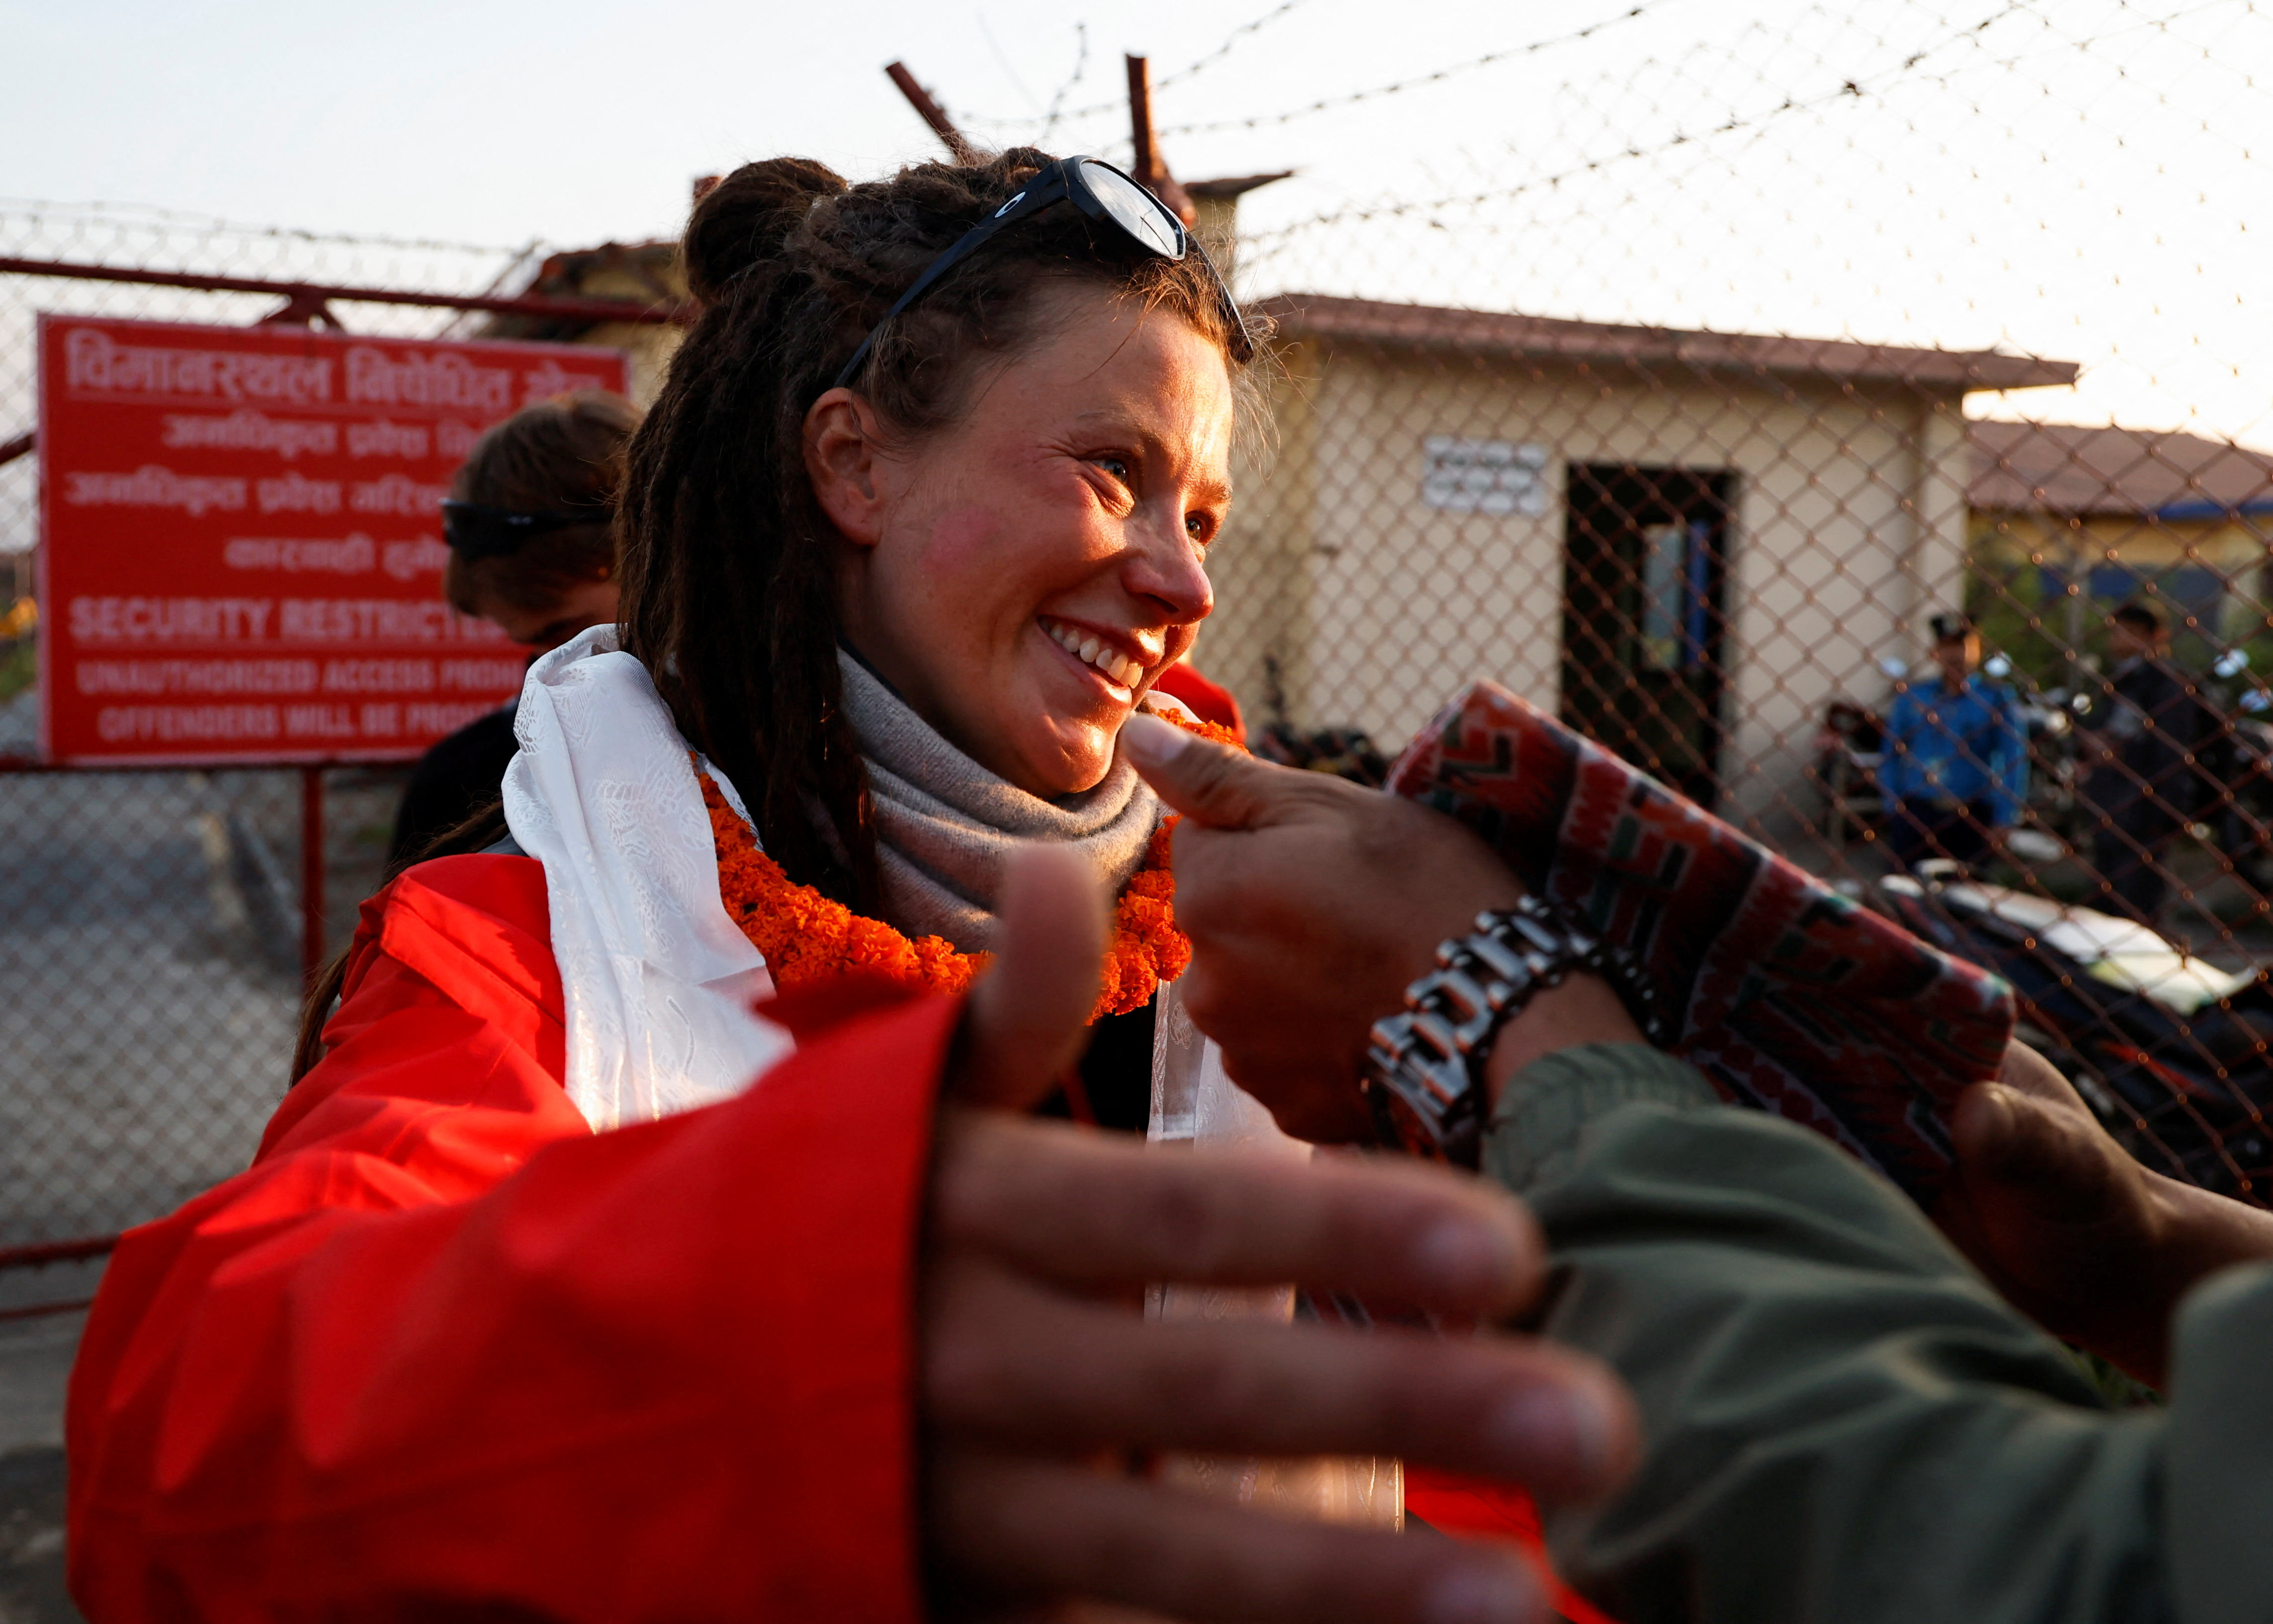 Norwegian mountaineer Kristin Harila who became the fastest woman to climb all the 14 eight-thousand meters peaks arrives in Kathmandu